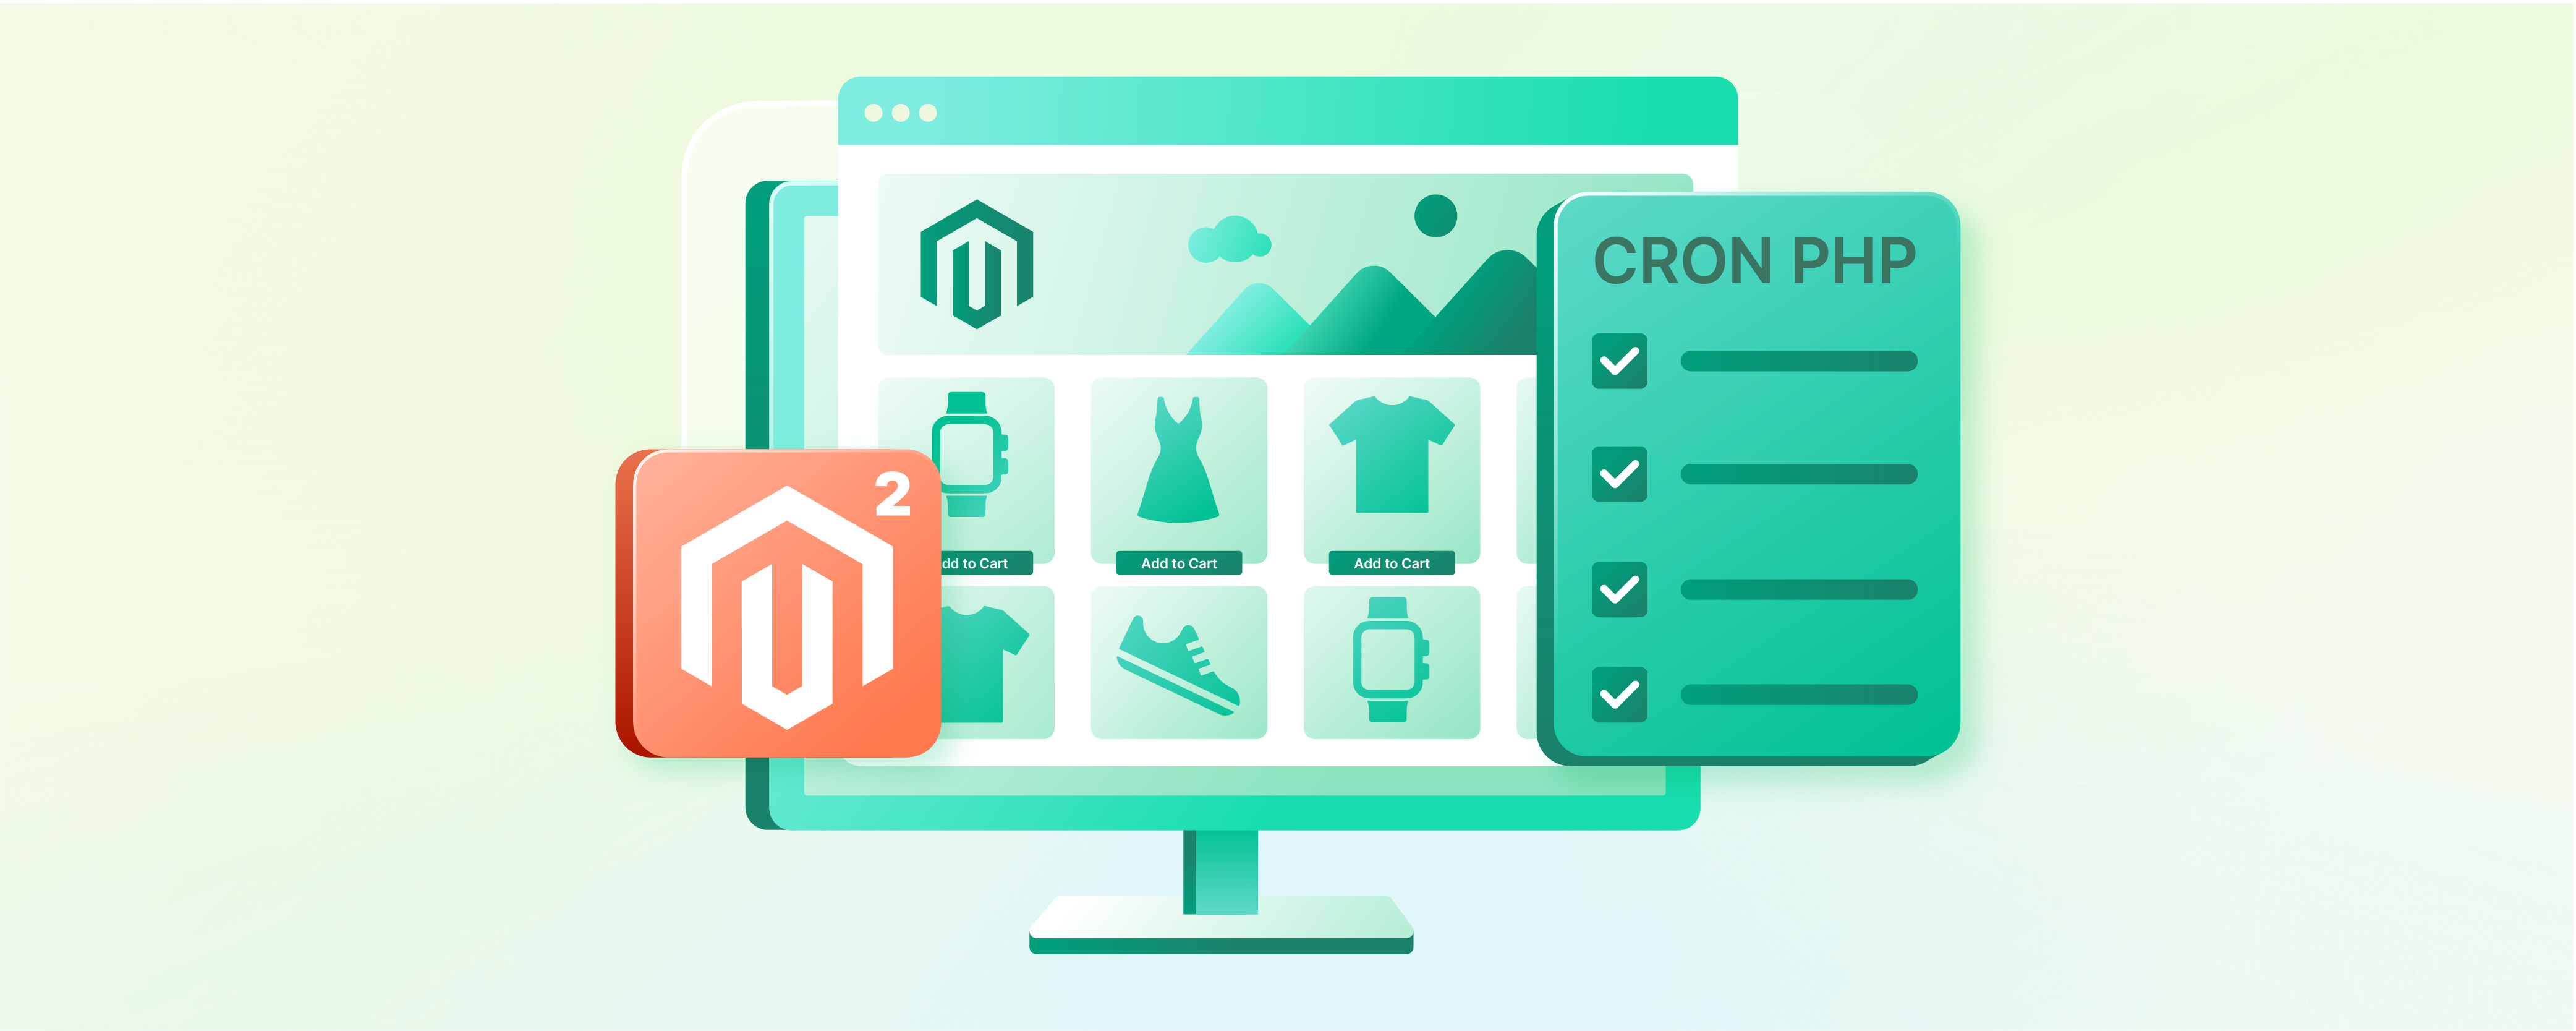 How to Secure Magento Cron PHP?